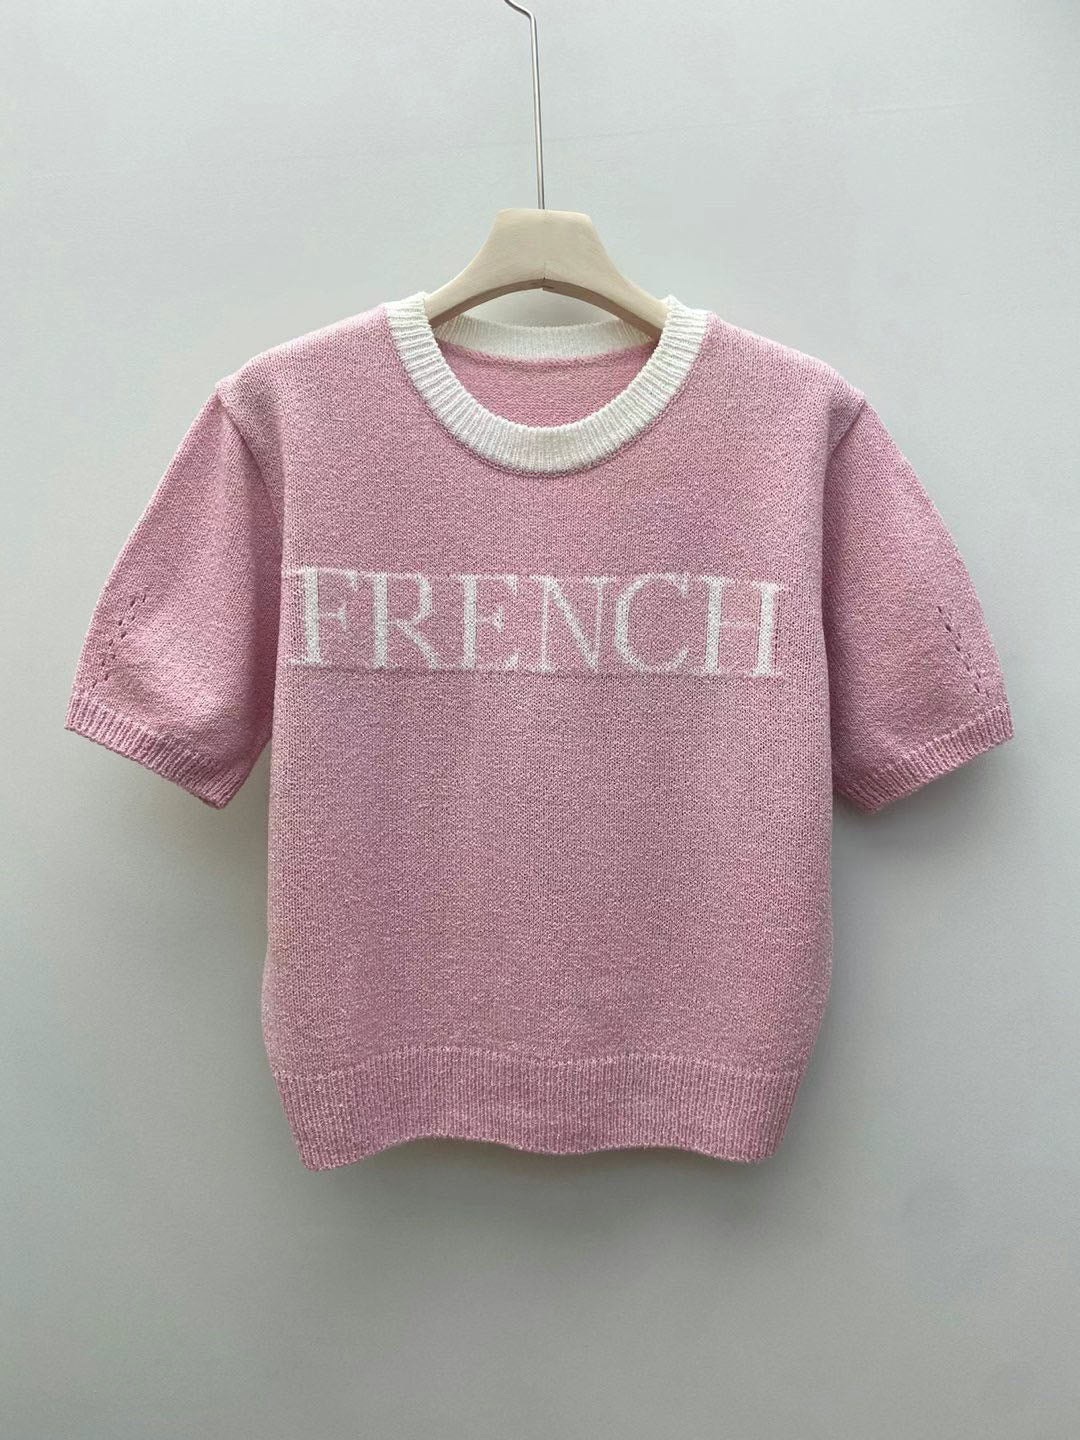 "FRENCH" Top (4 colors)